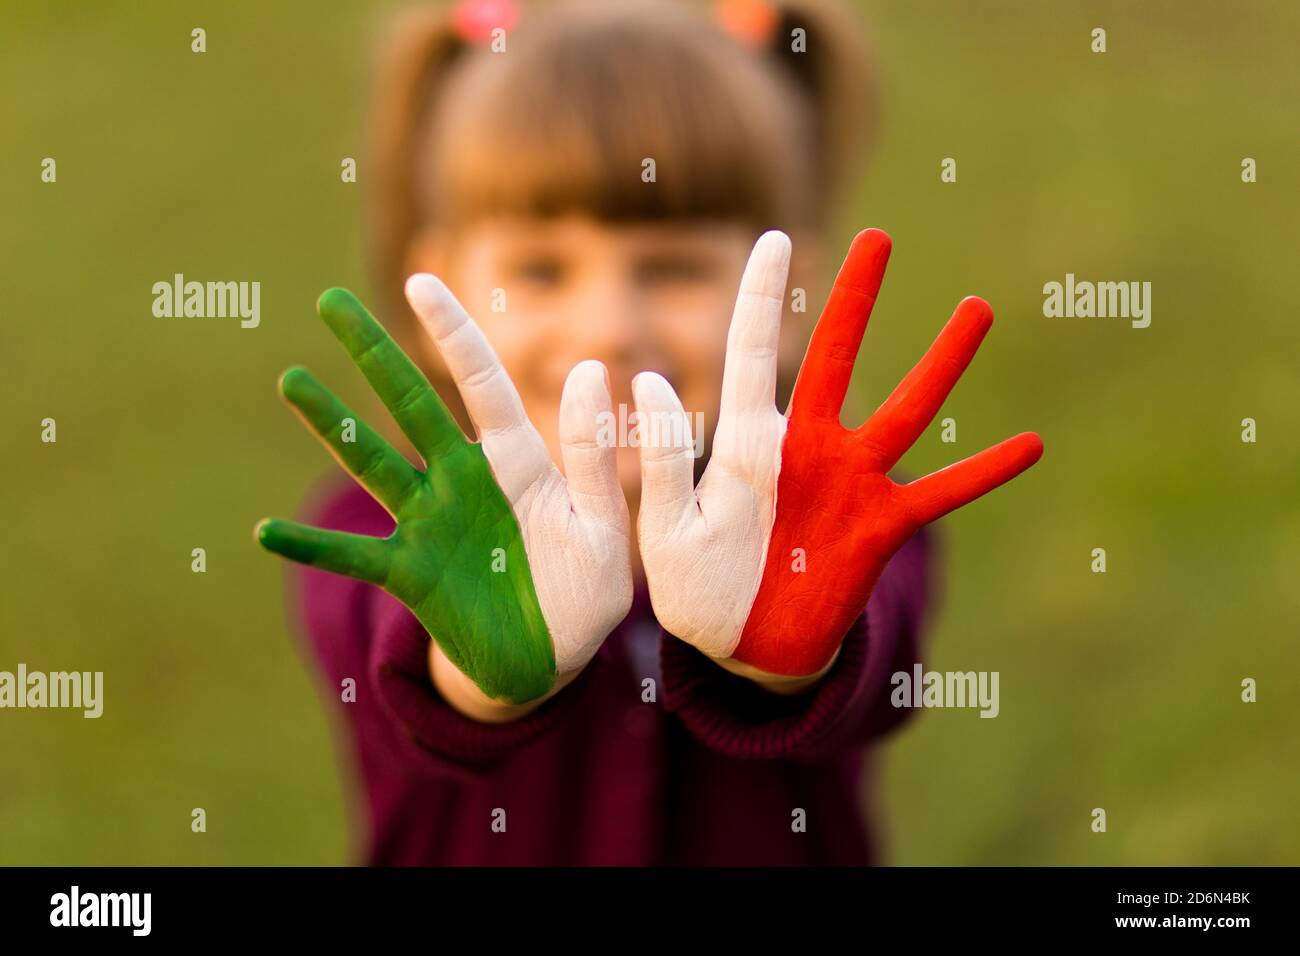 Painted kid hands in italy flag colors. Creative Stock Photo